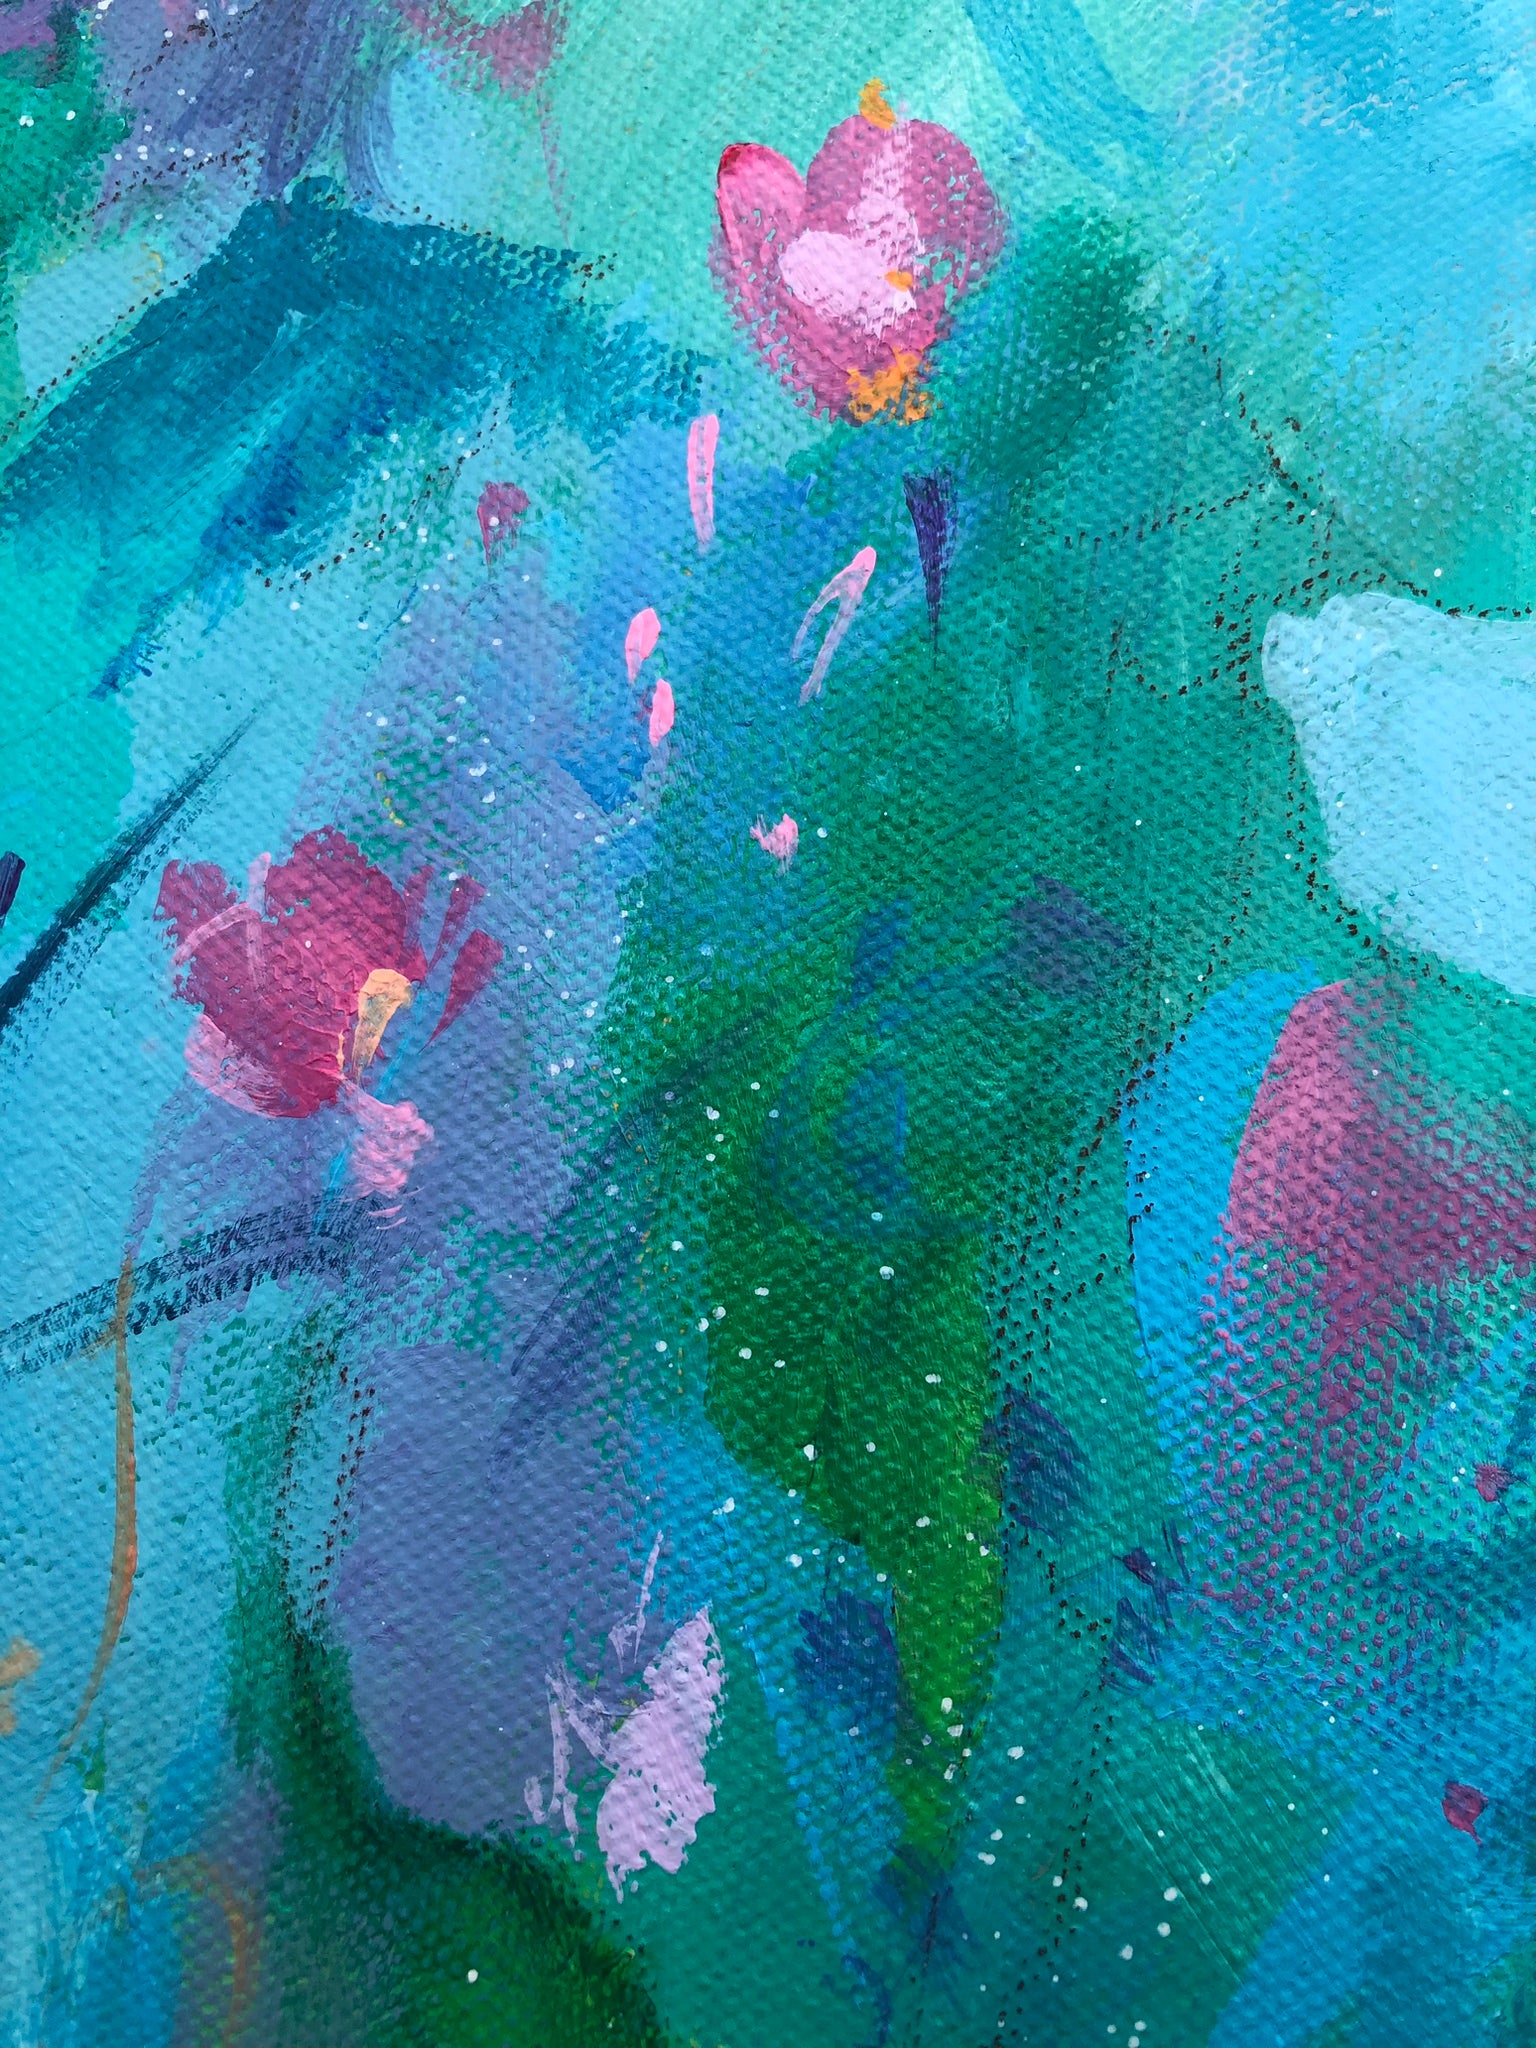 Close up details of the painting's background in shades of green, turquoise and blue and featuring small pink flowers scattered about